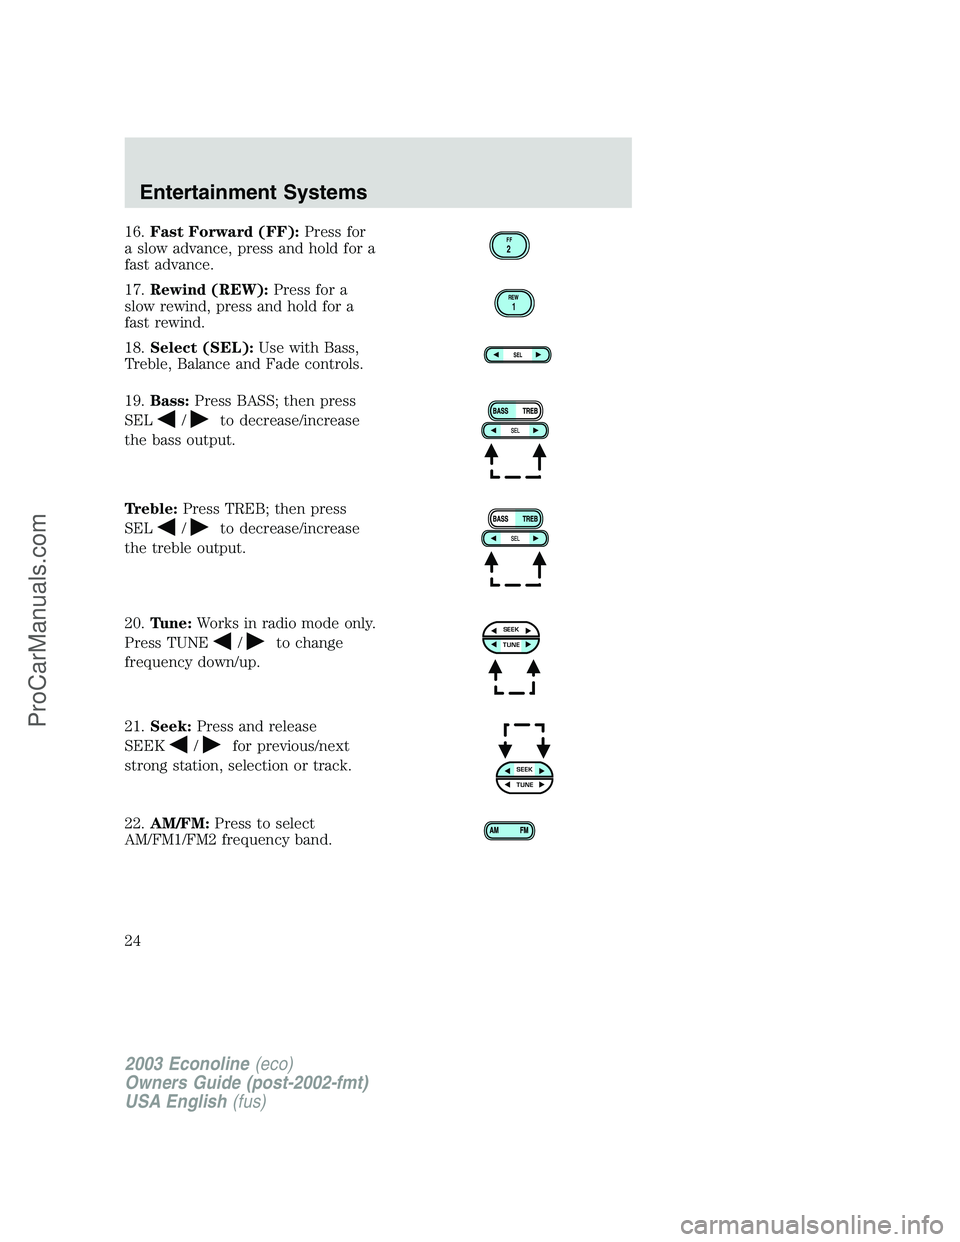 FORD E-150 2003  Owners Manual 16.Fast Forward (FF):Press for
a slow advance, press and hold for a
fast advance.
17.Rewind (REW):Press for a
slow rewind, press and hold for a
fast rewind.
18.Select (SEL):Use with Bass,
Treble, Bala